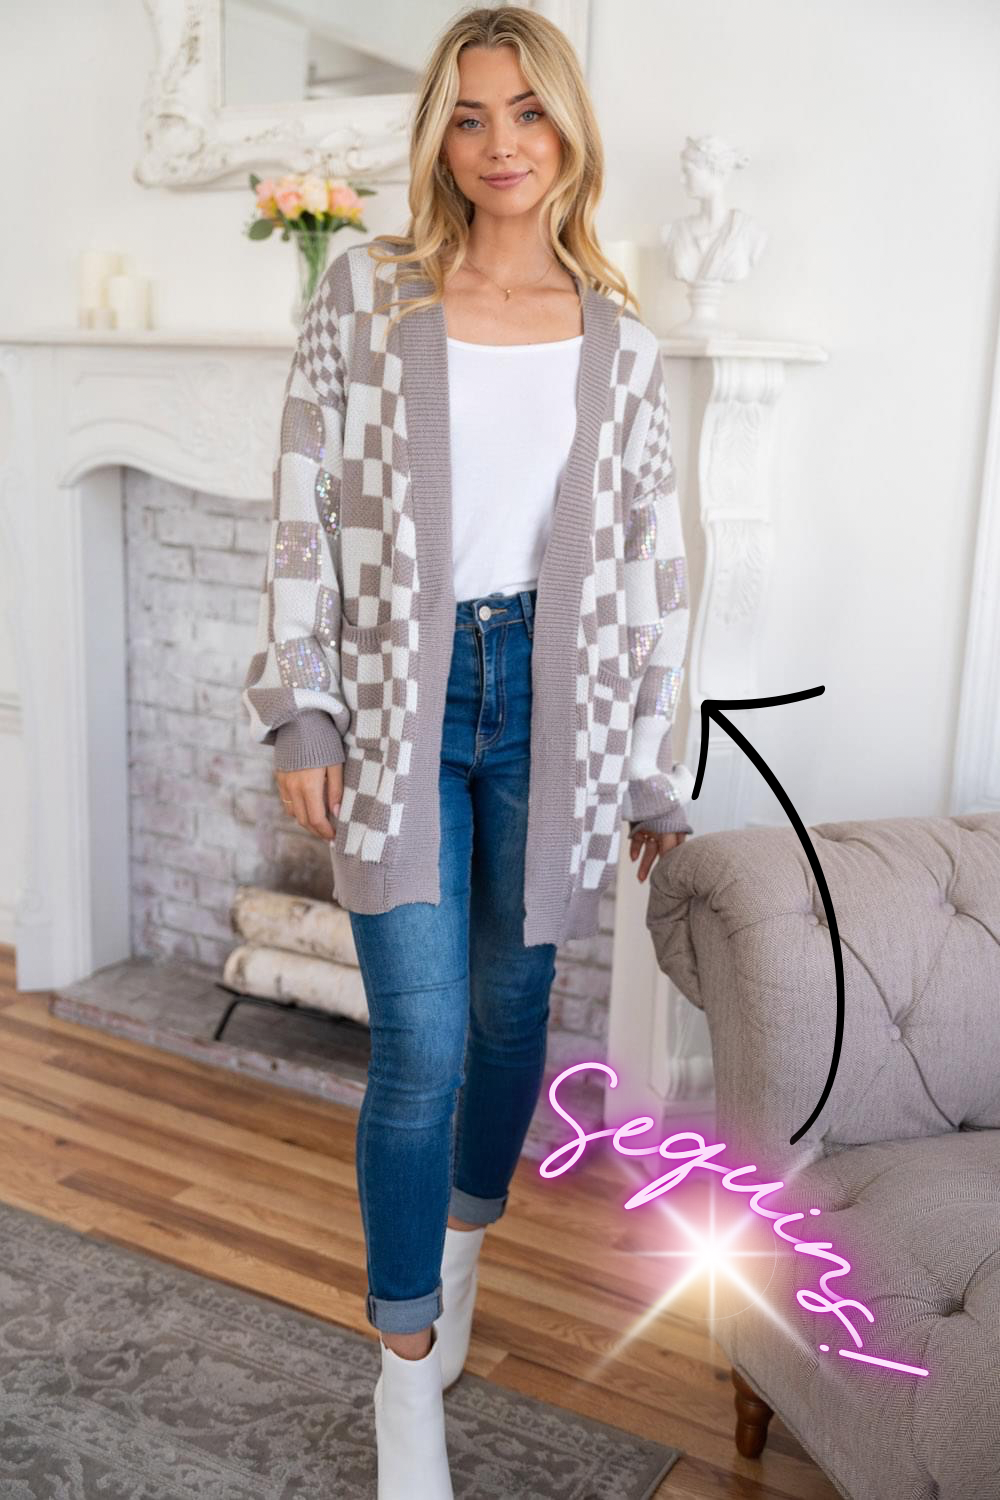 Steal the Spotlight Sequined Cardigan